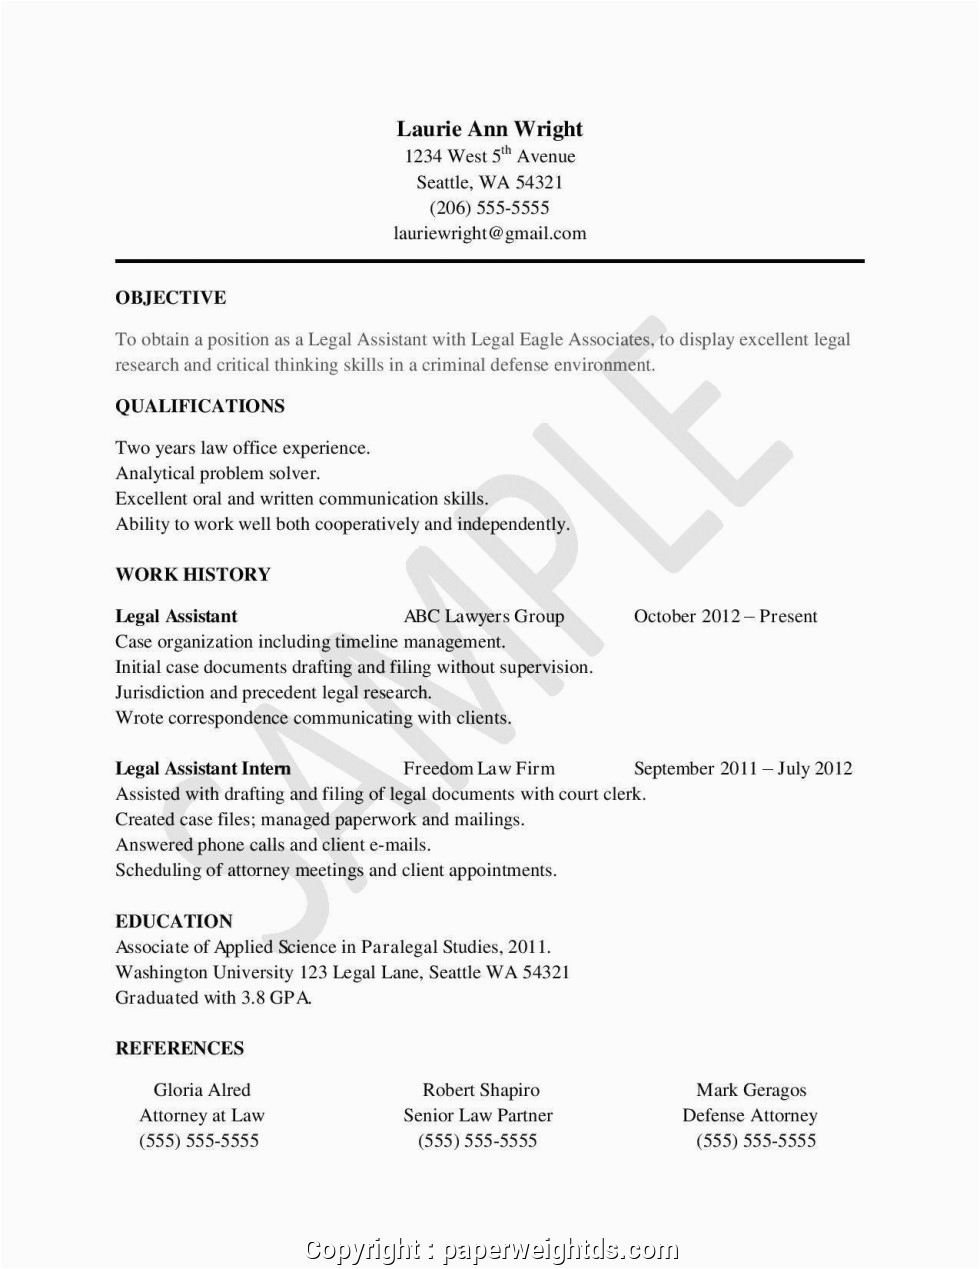 Resume Sample for Sales Lady without Experience New Case Manager Resume No Experience Sample Resume